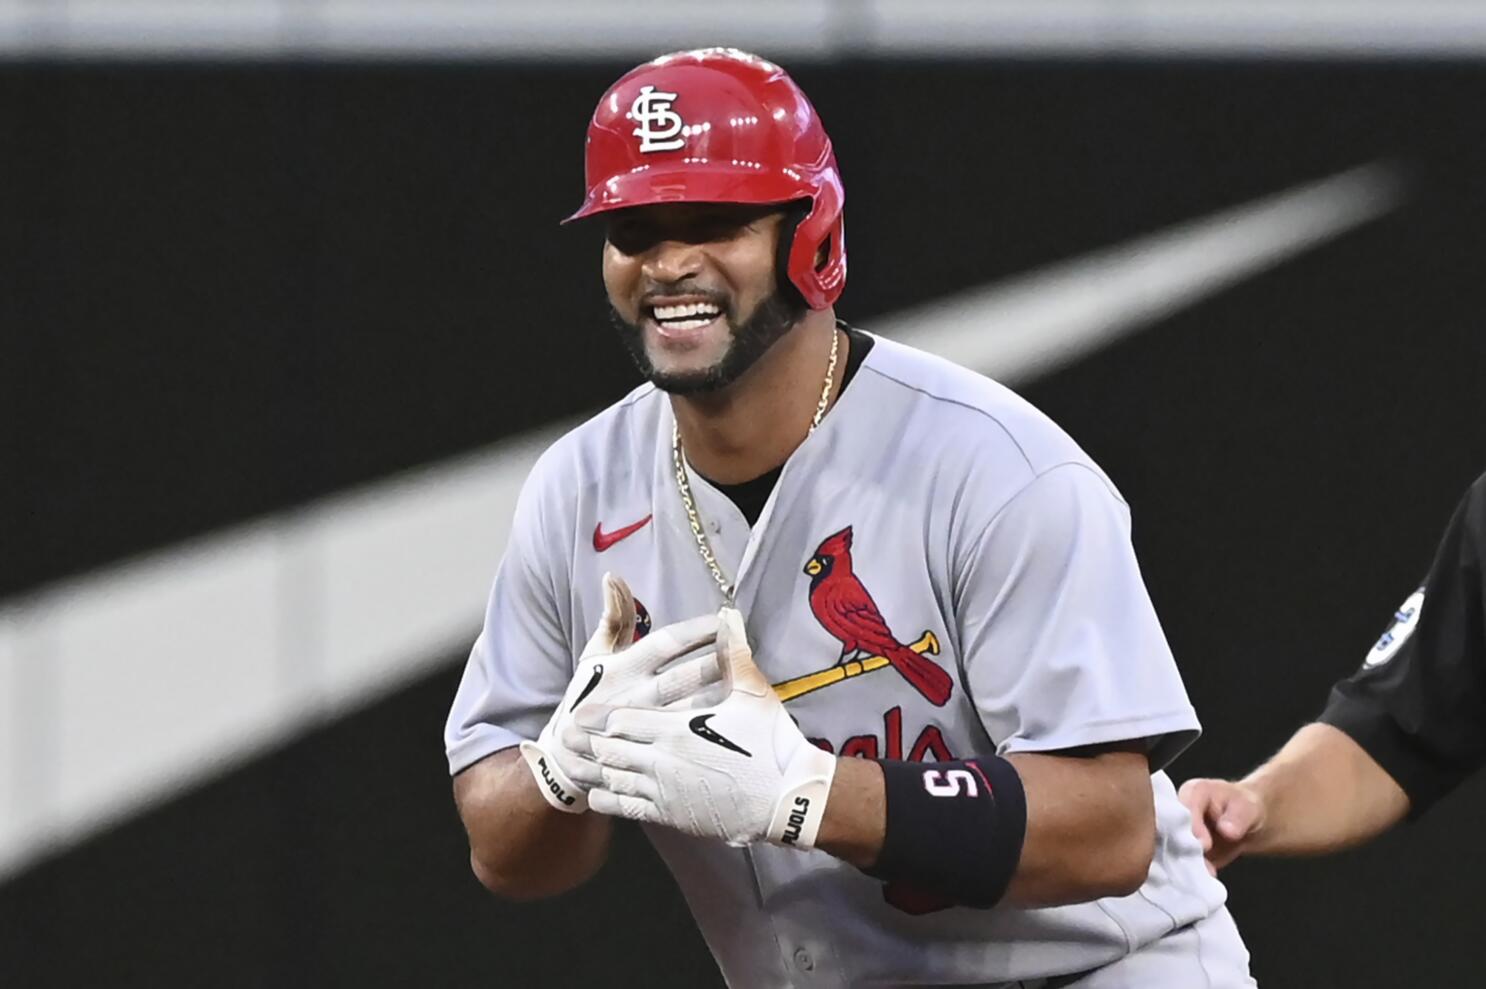 It's No. 698 as Albert Pujols helps delivers Cardinals another victory late  - The Boston Globe